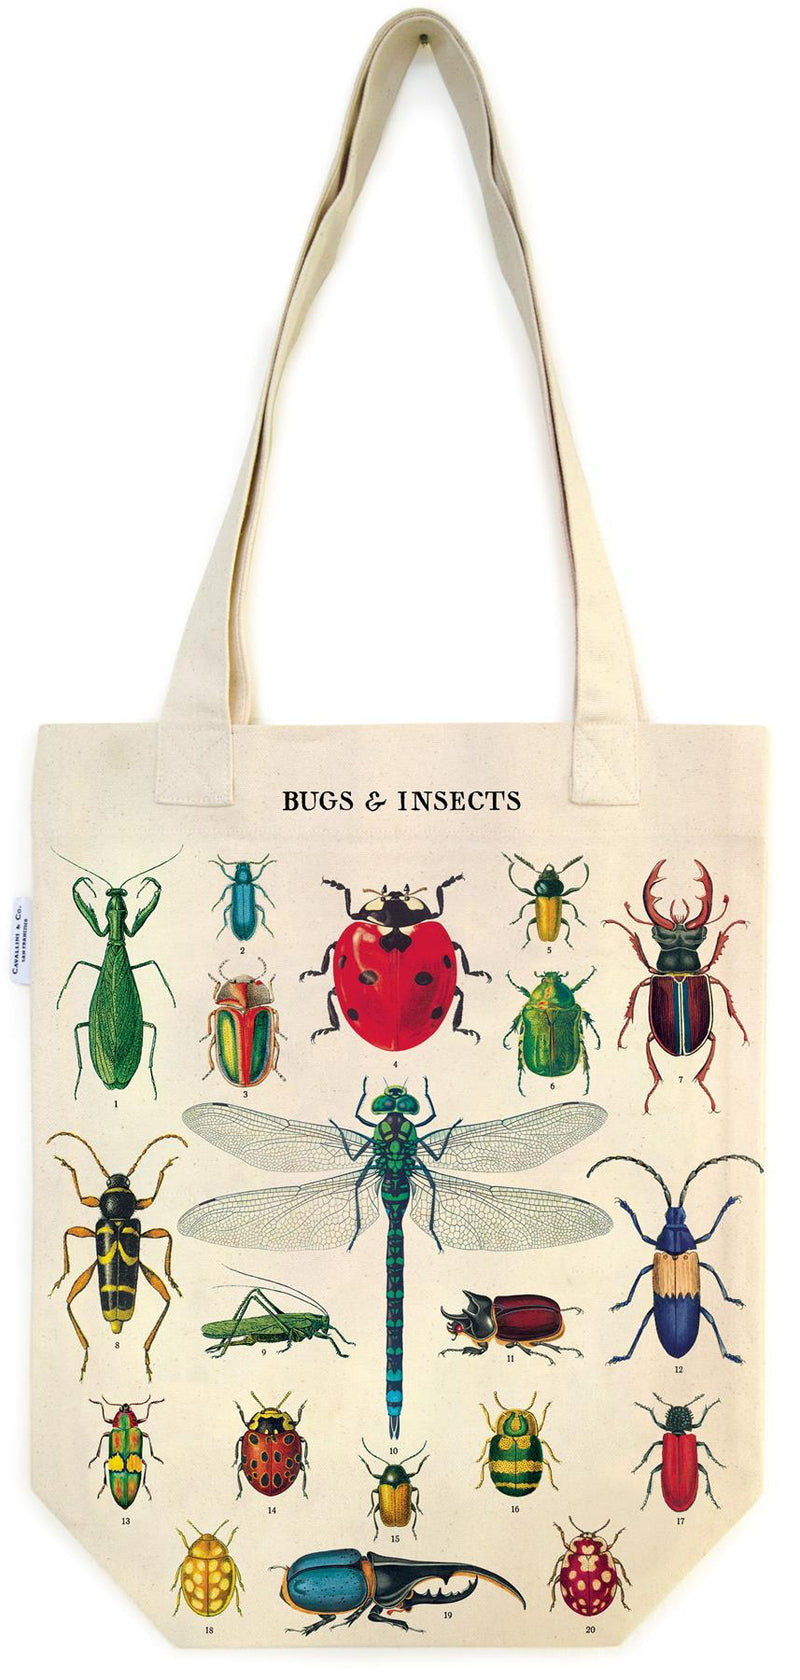 Cavallini - 100% Natural Cotton Vintage Tote Bag - 33x40.5cms - Bugs & Insects